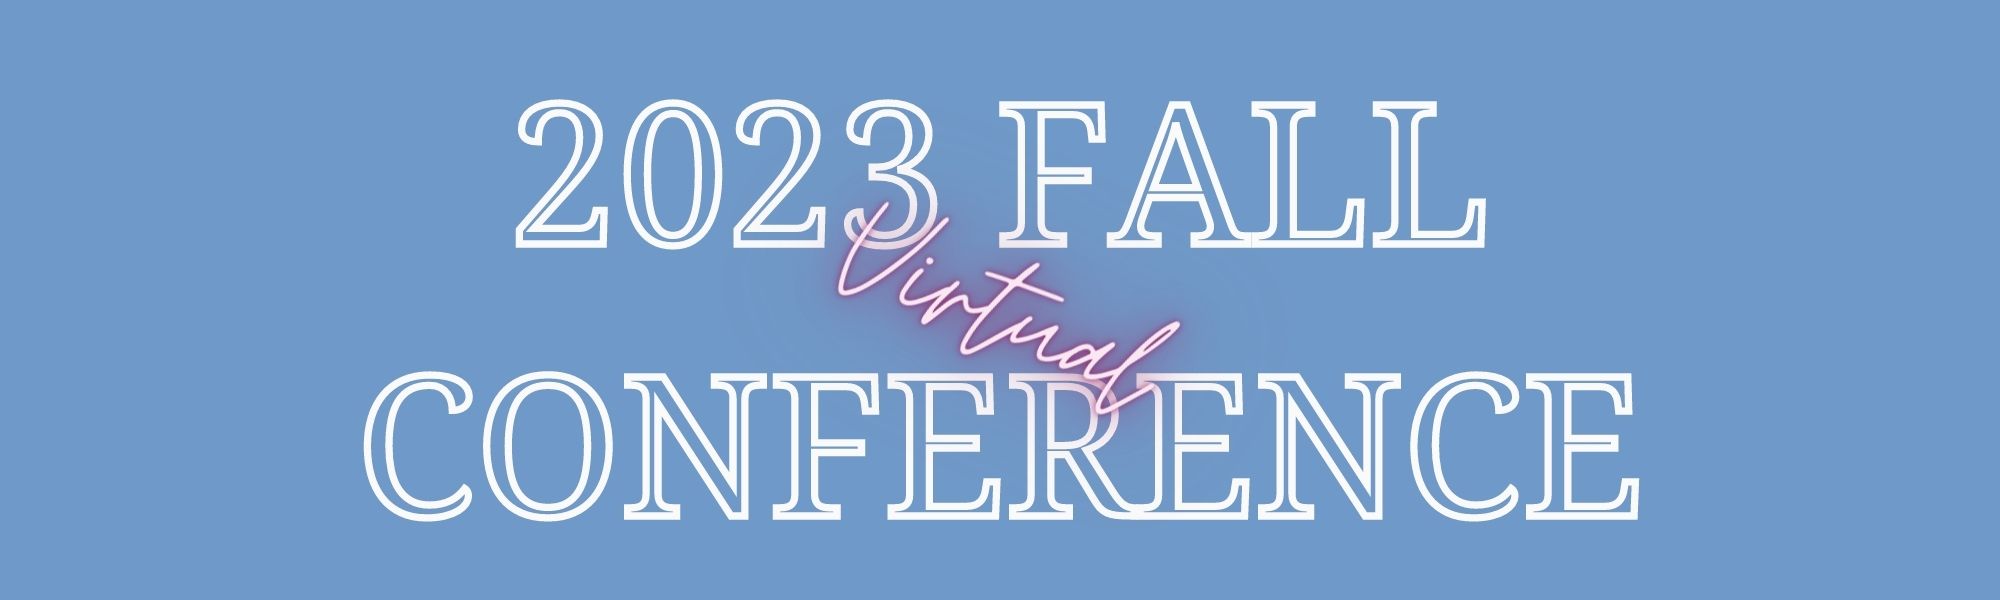 2023-fall-conference